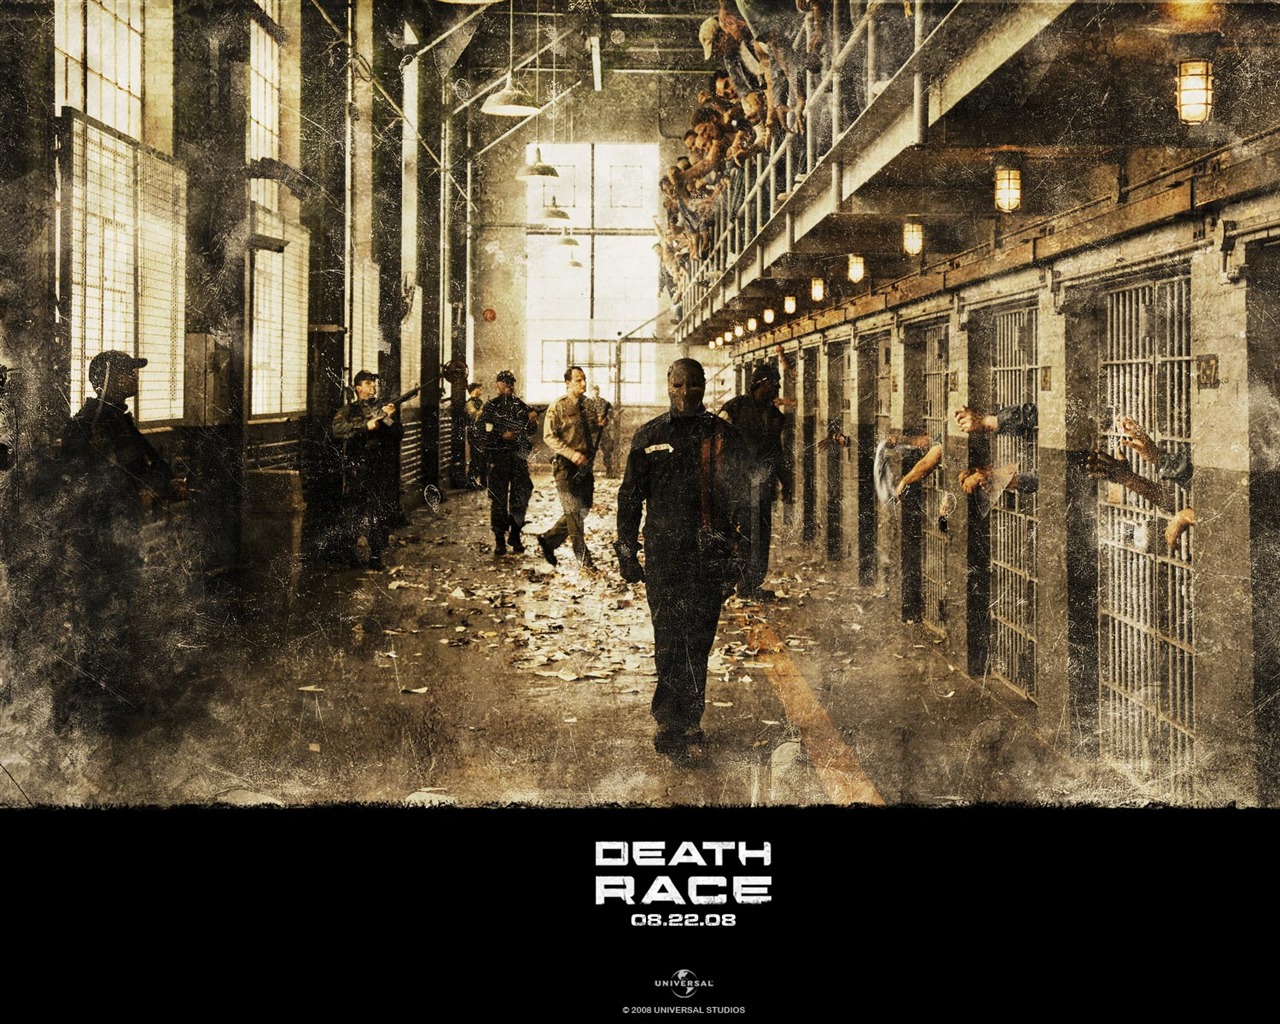 Death Race Movie Wallpapers #2 - 1280x1024